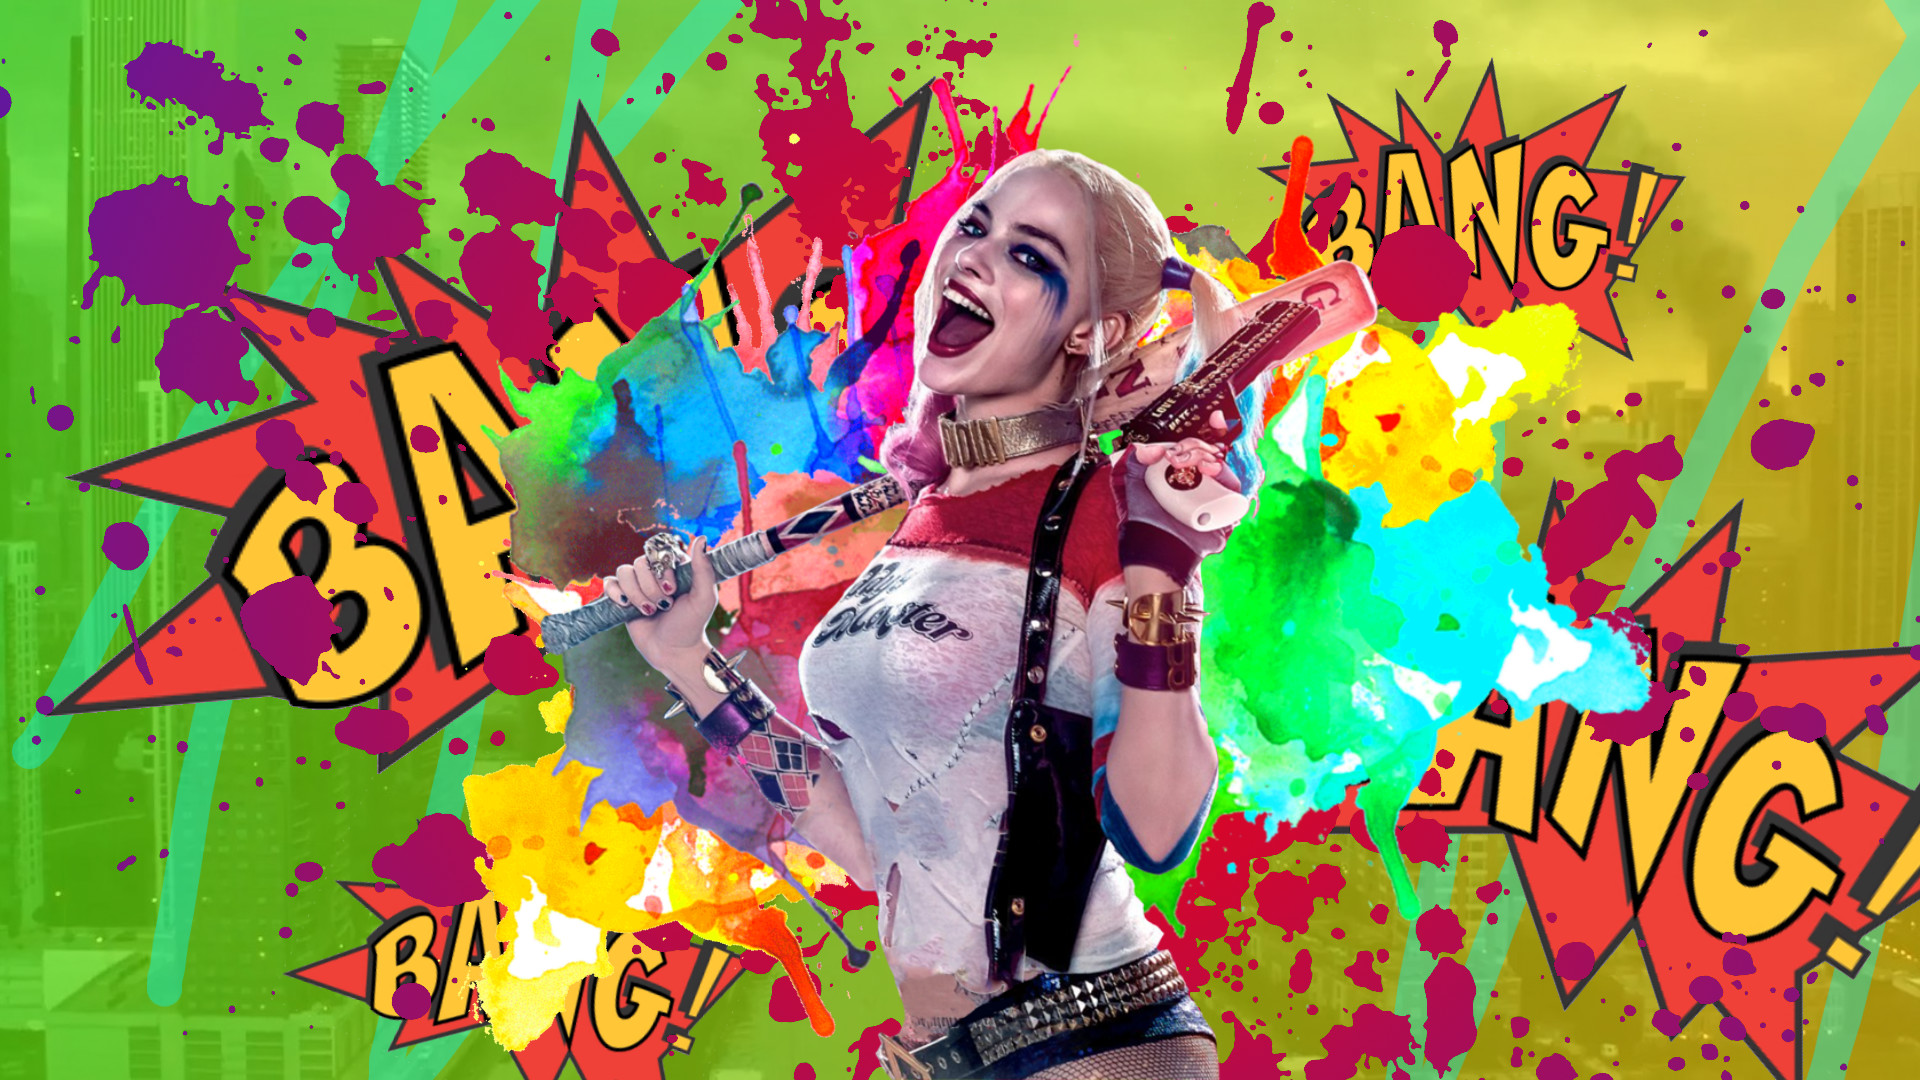 1920x1080 Suicide Squad Harley Quinn Wallpaper by KryptixDesigns Suicide Squad Harley  Quinn Wallpaper by KryptixDesigns